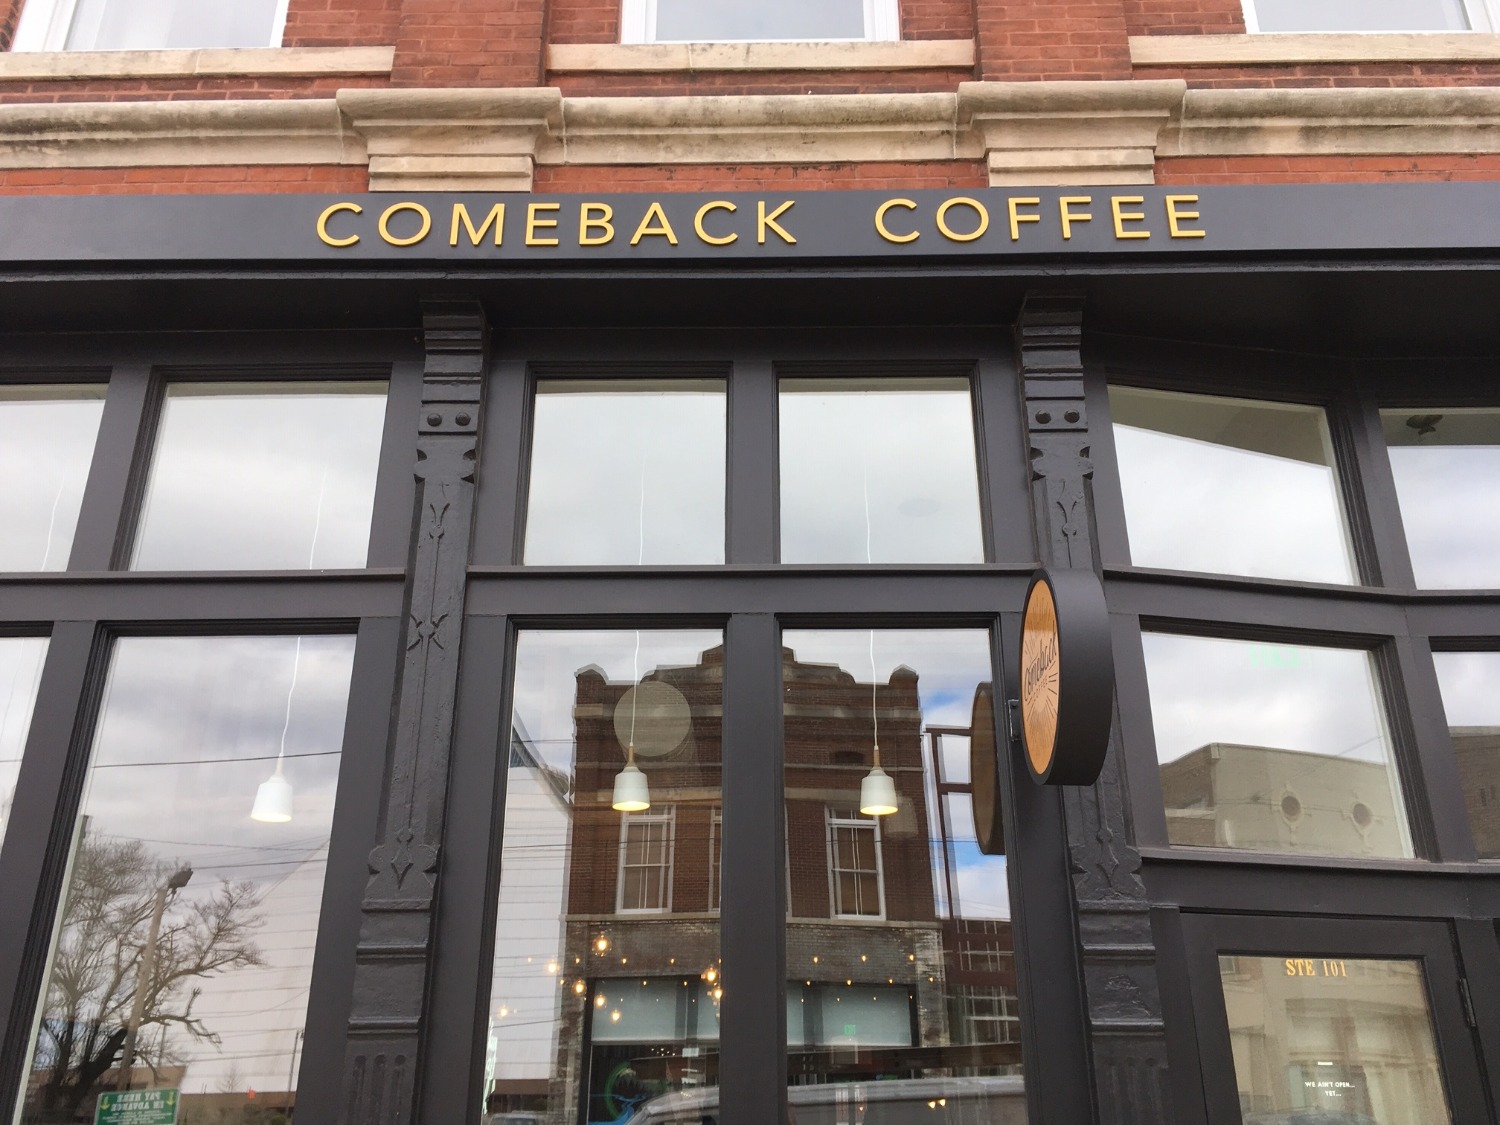 The view from the front windows of Comeback Coffee, the Pinch's first new business in years, includes the iconic Pyramid. (Kim Coleman)